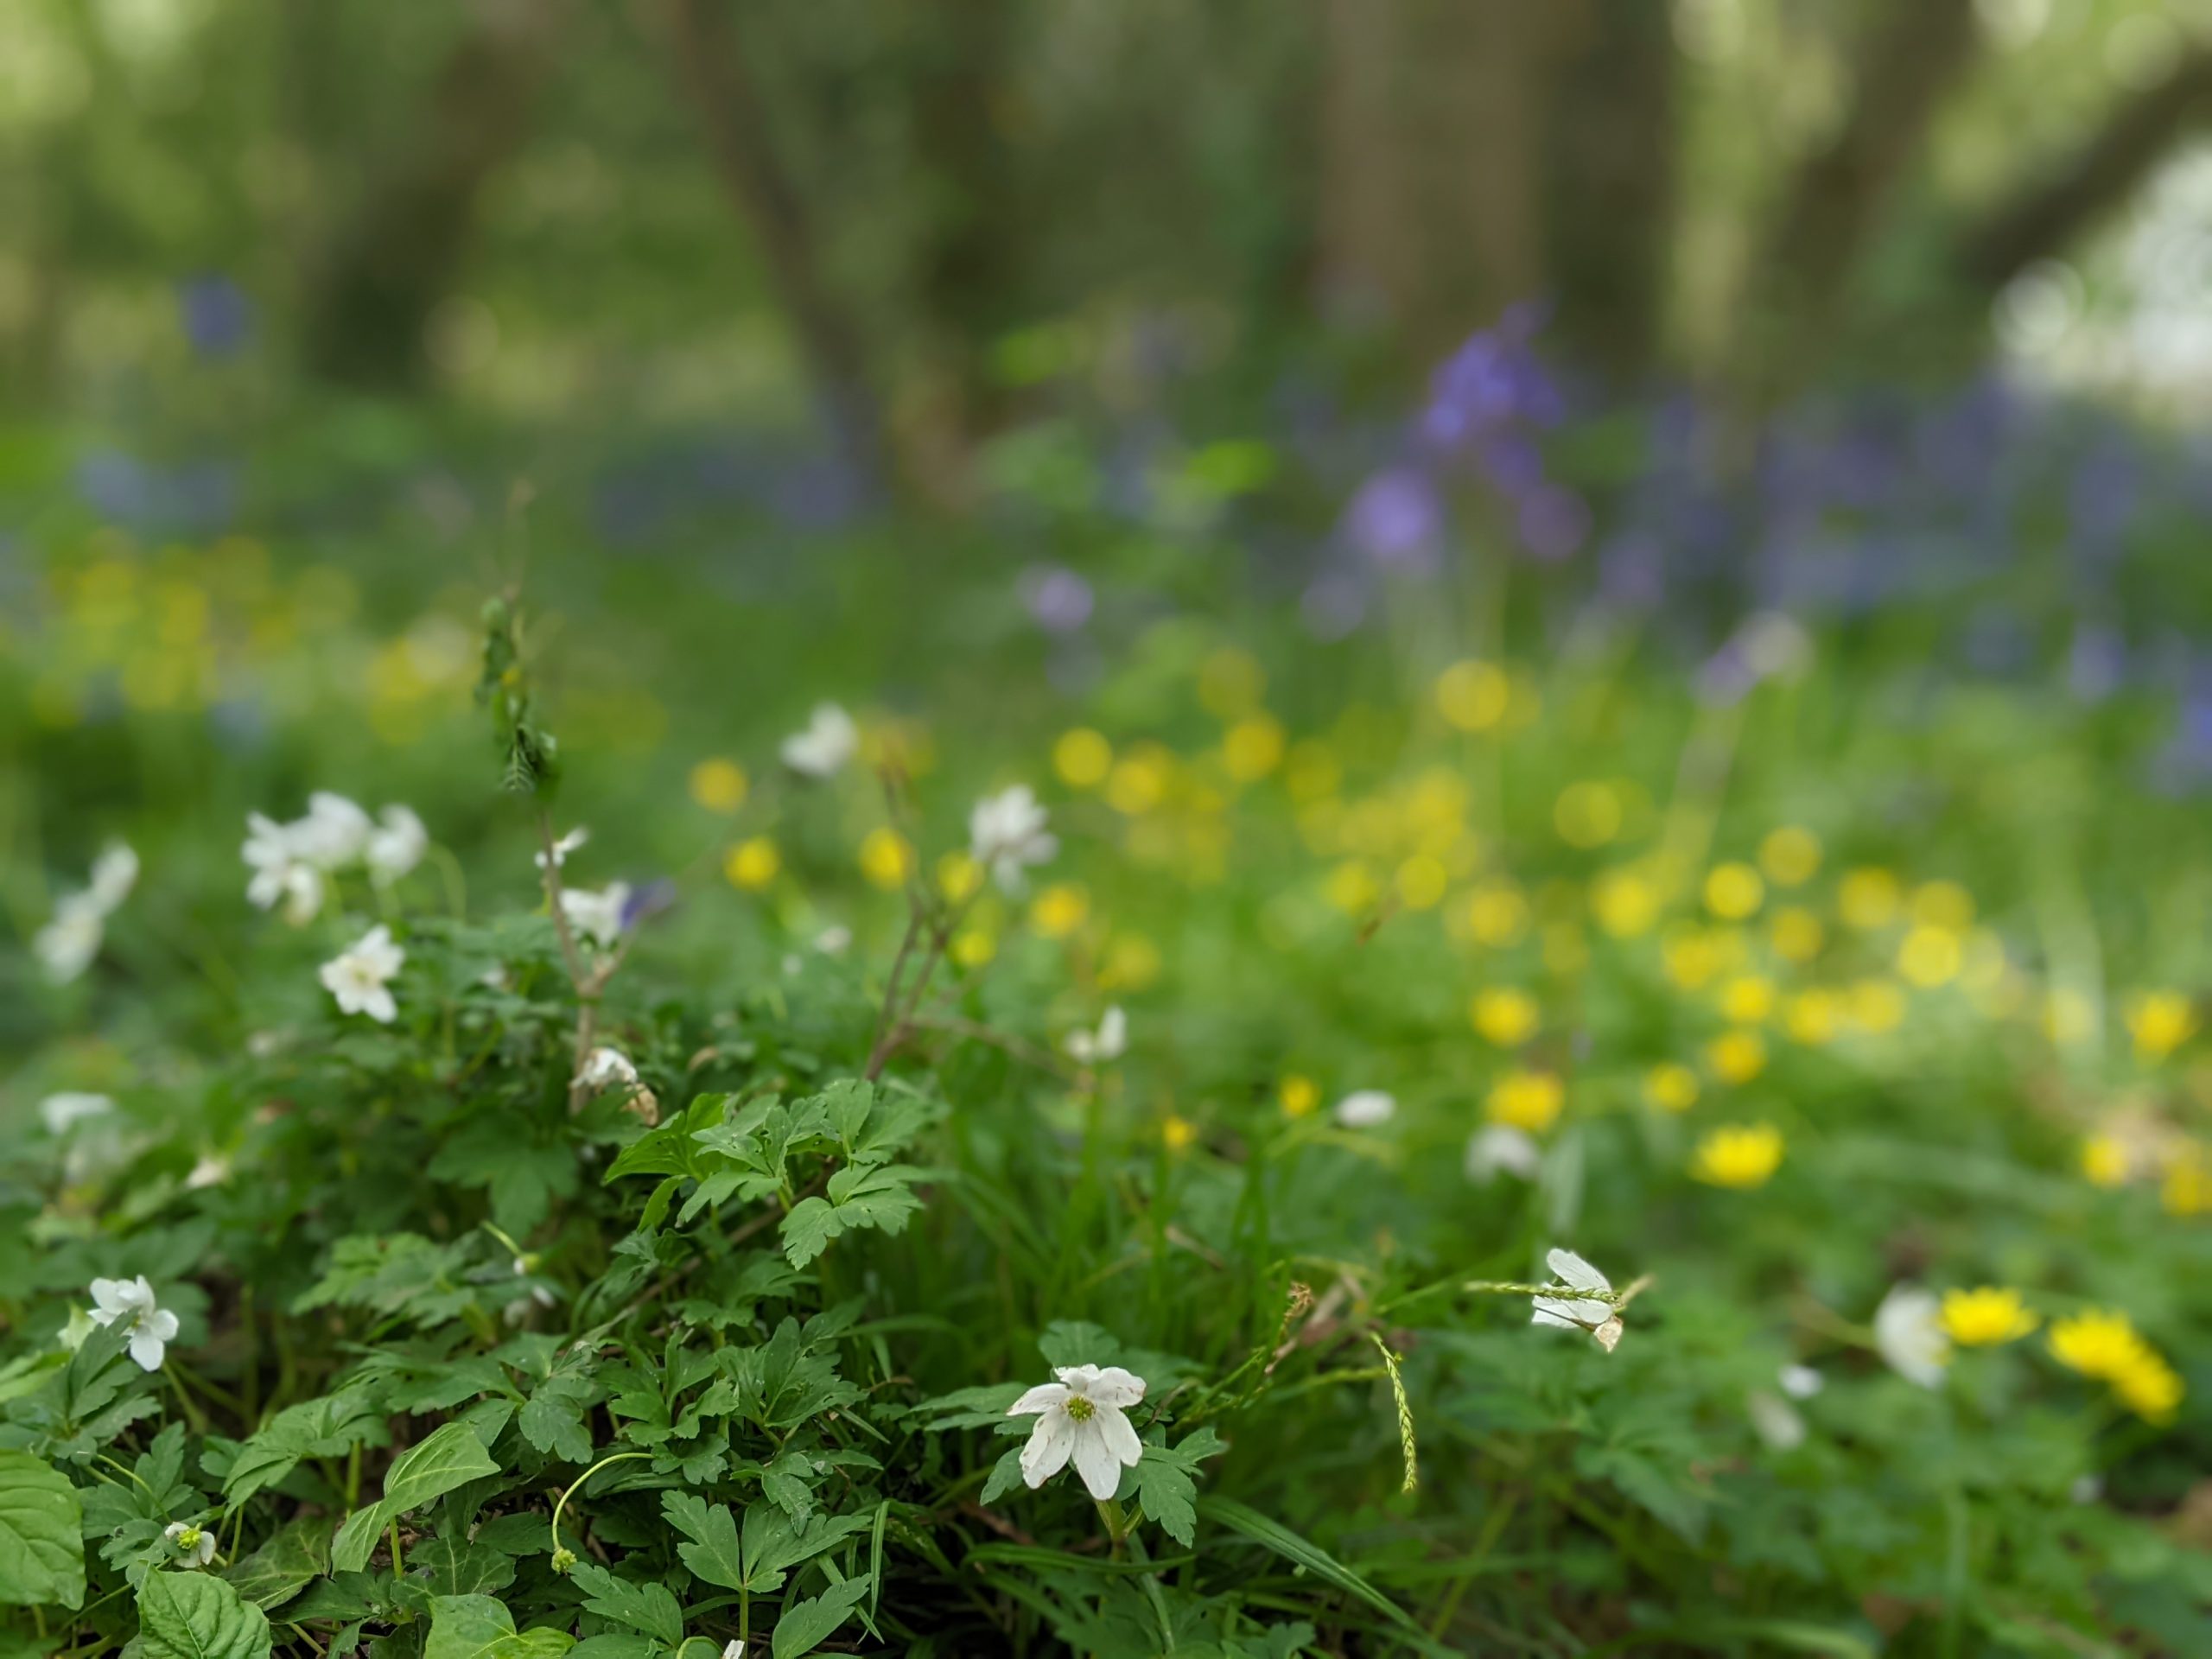 Forest flowers, white anemone in foreground, blurry yellow and blue in background.